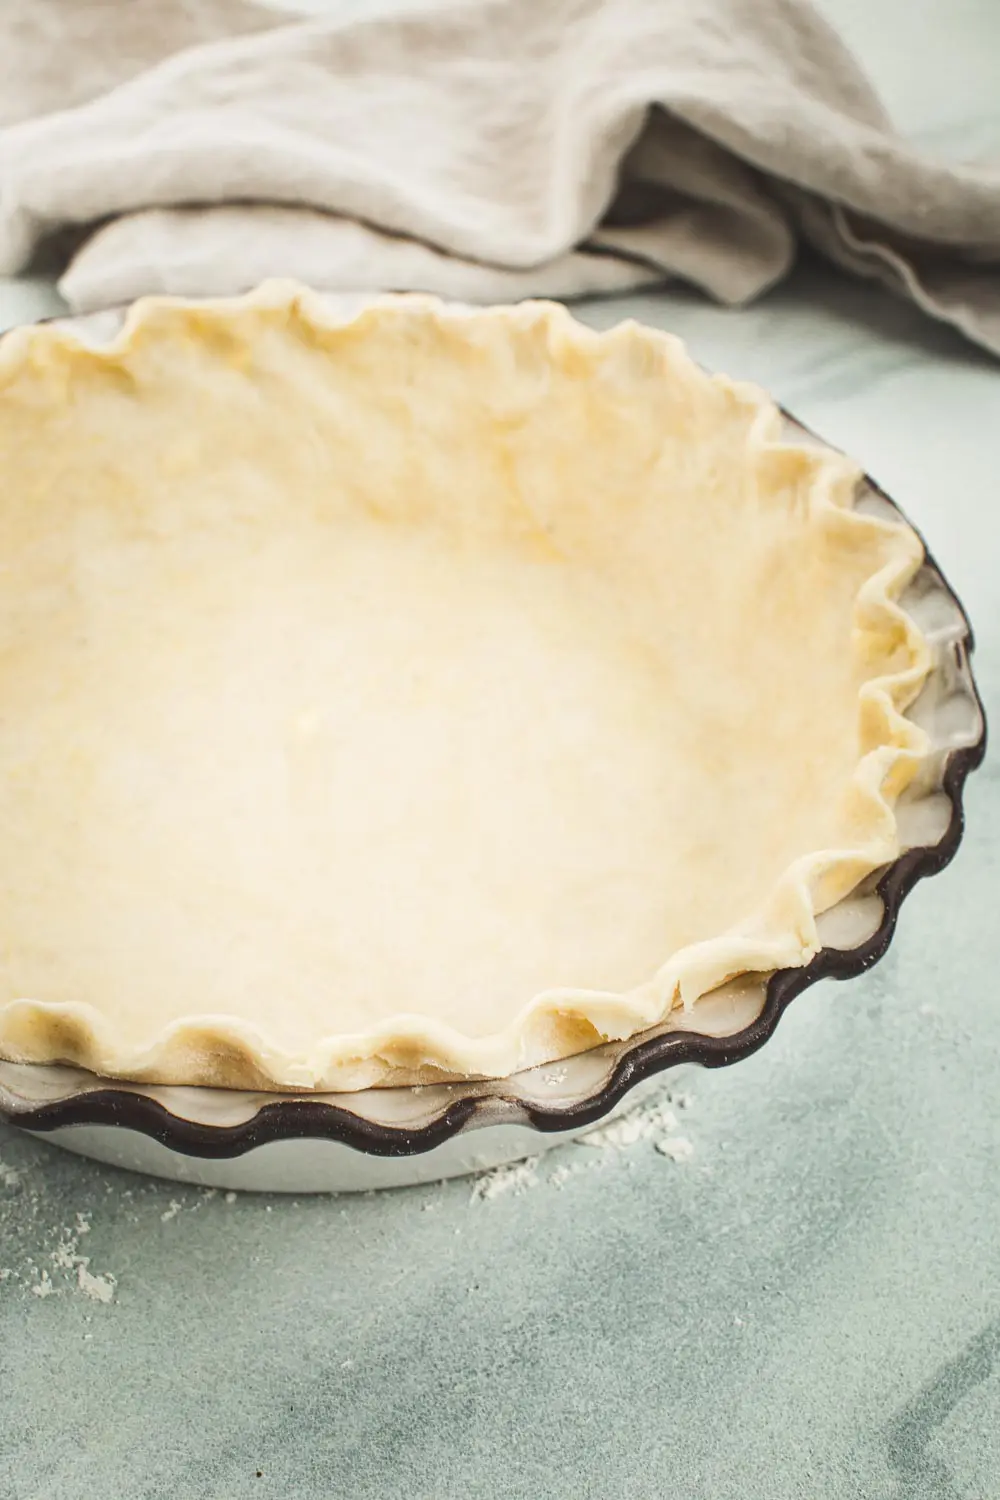 Homemade flaky pie crust set up in a white pie dish.